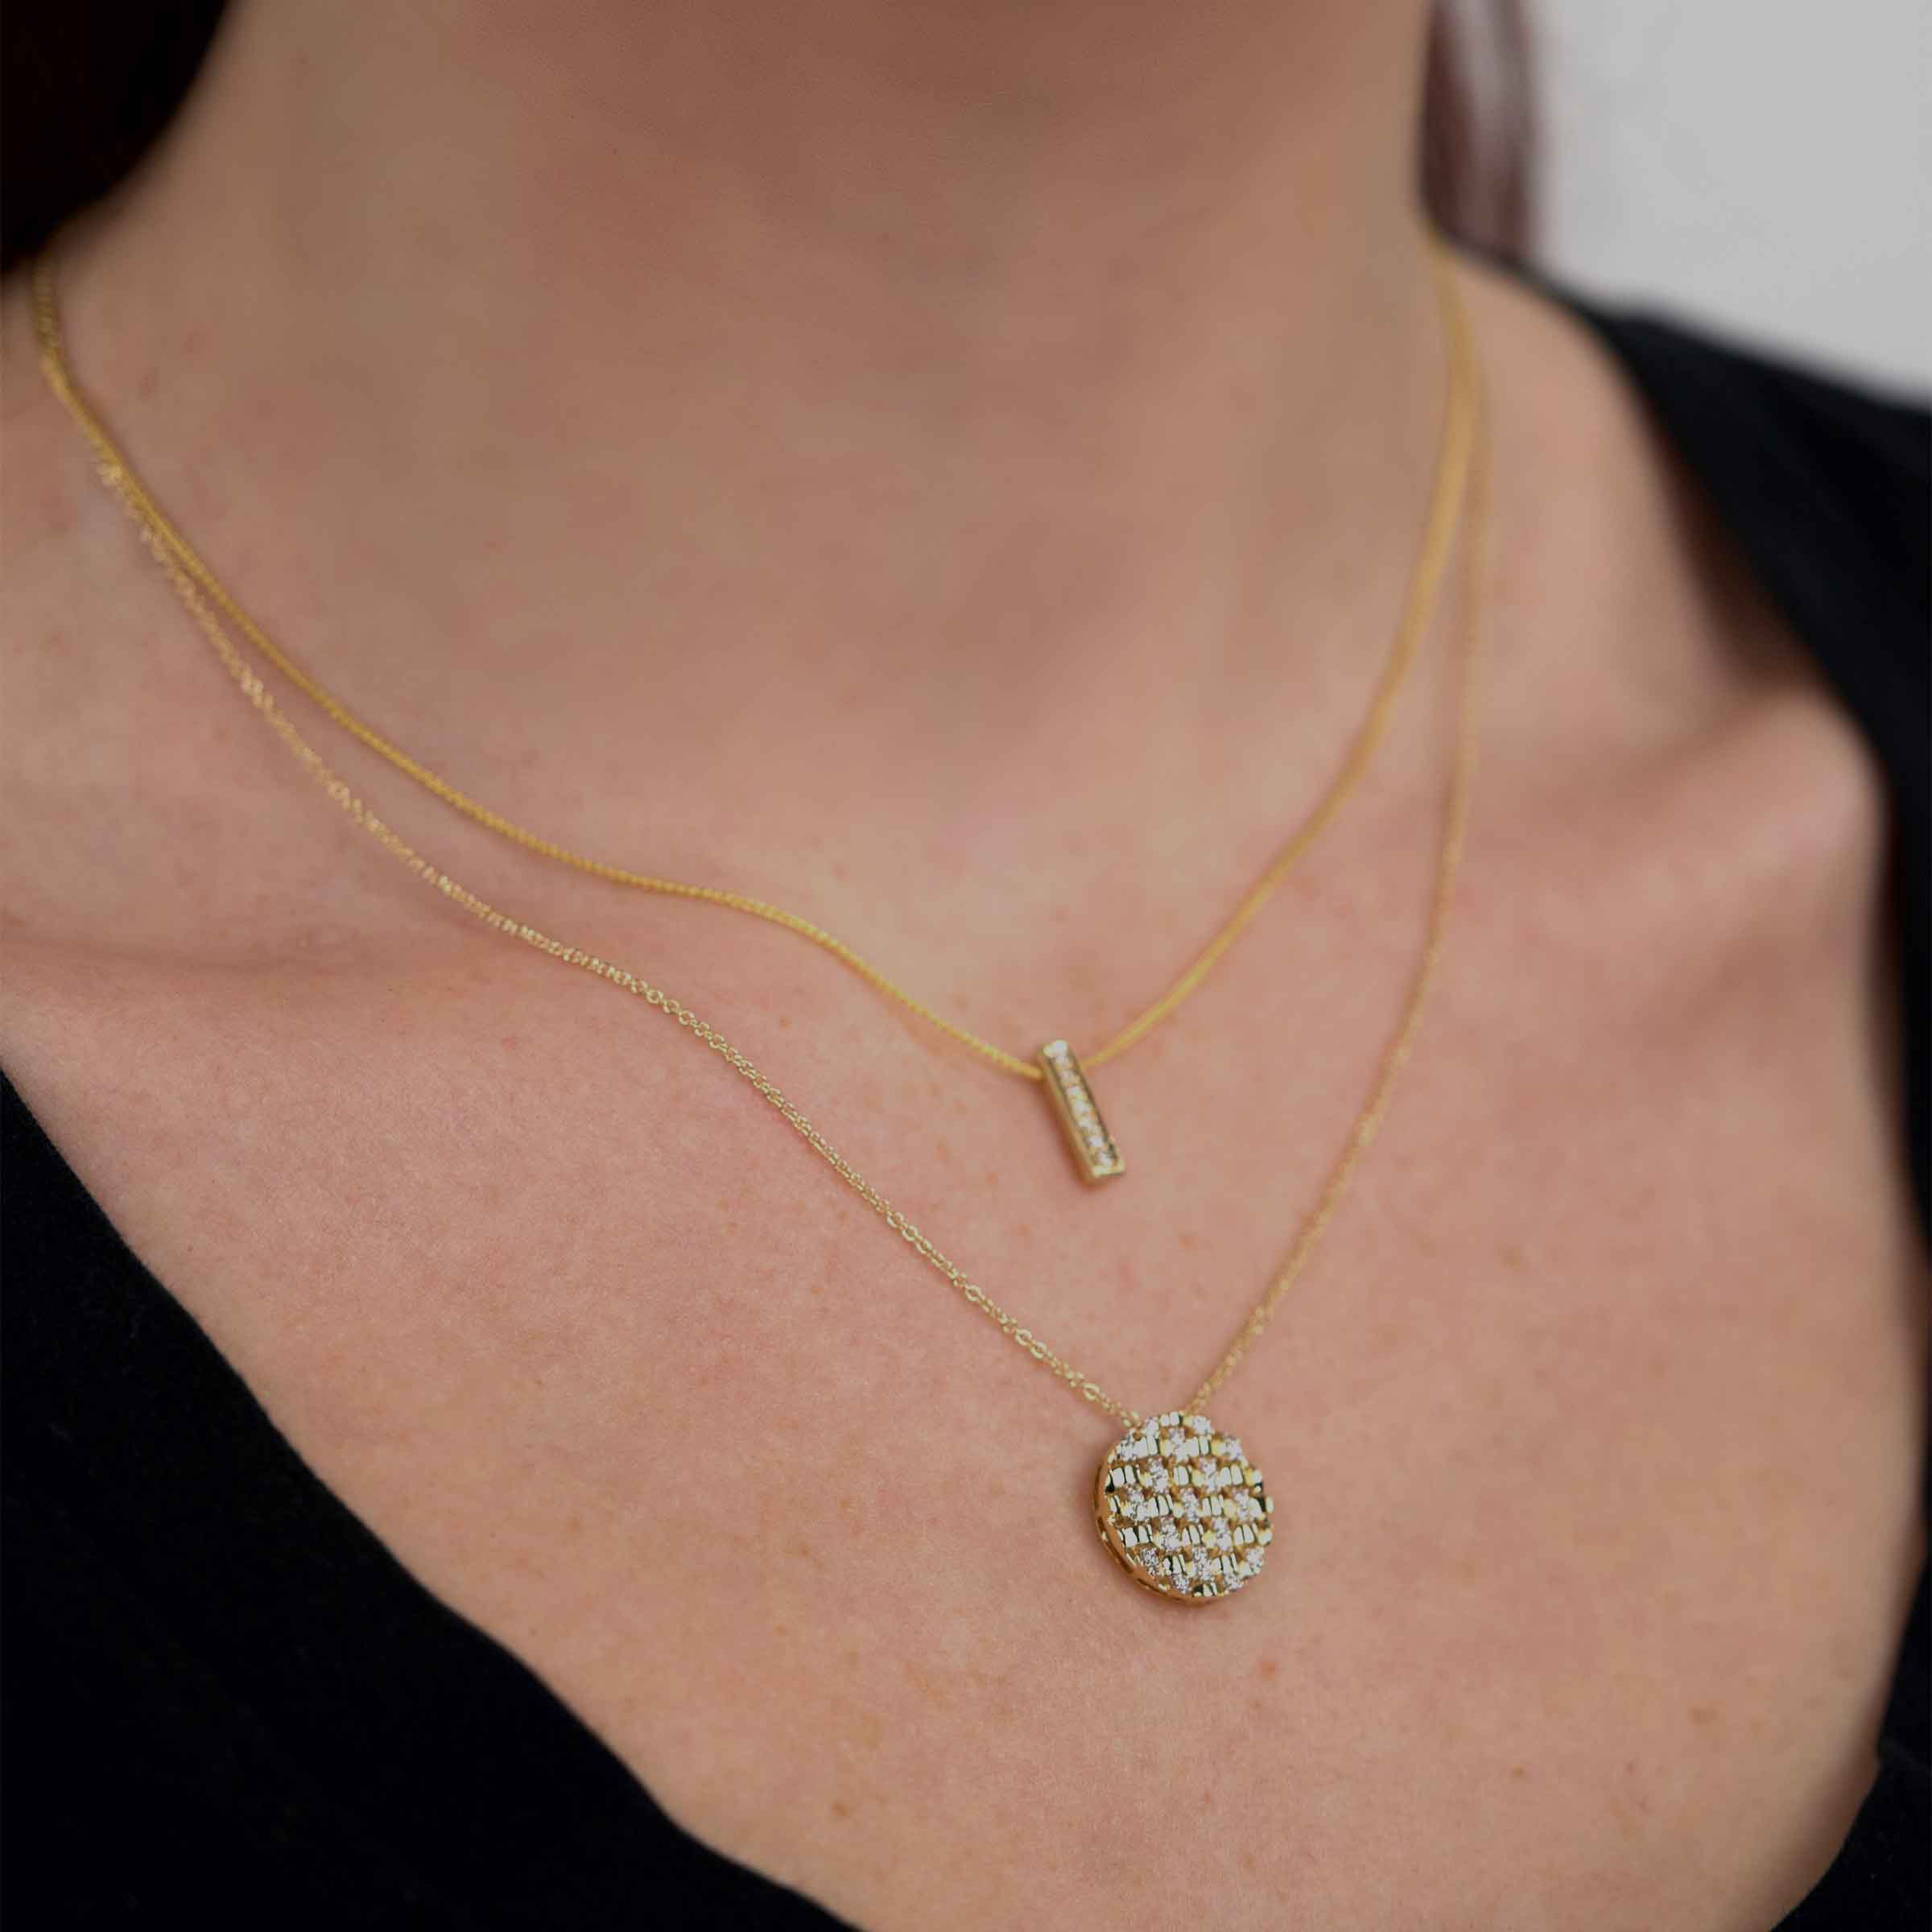 Disc Charms Necklace in Solid Gold - Tales In Gold